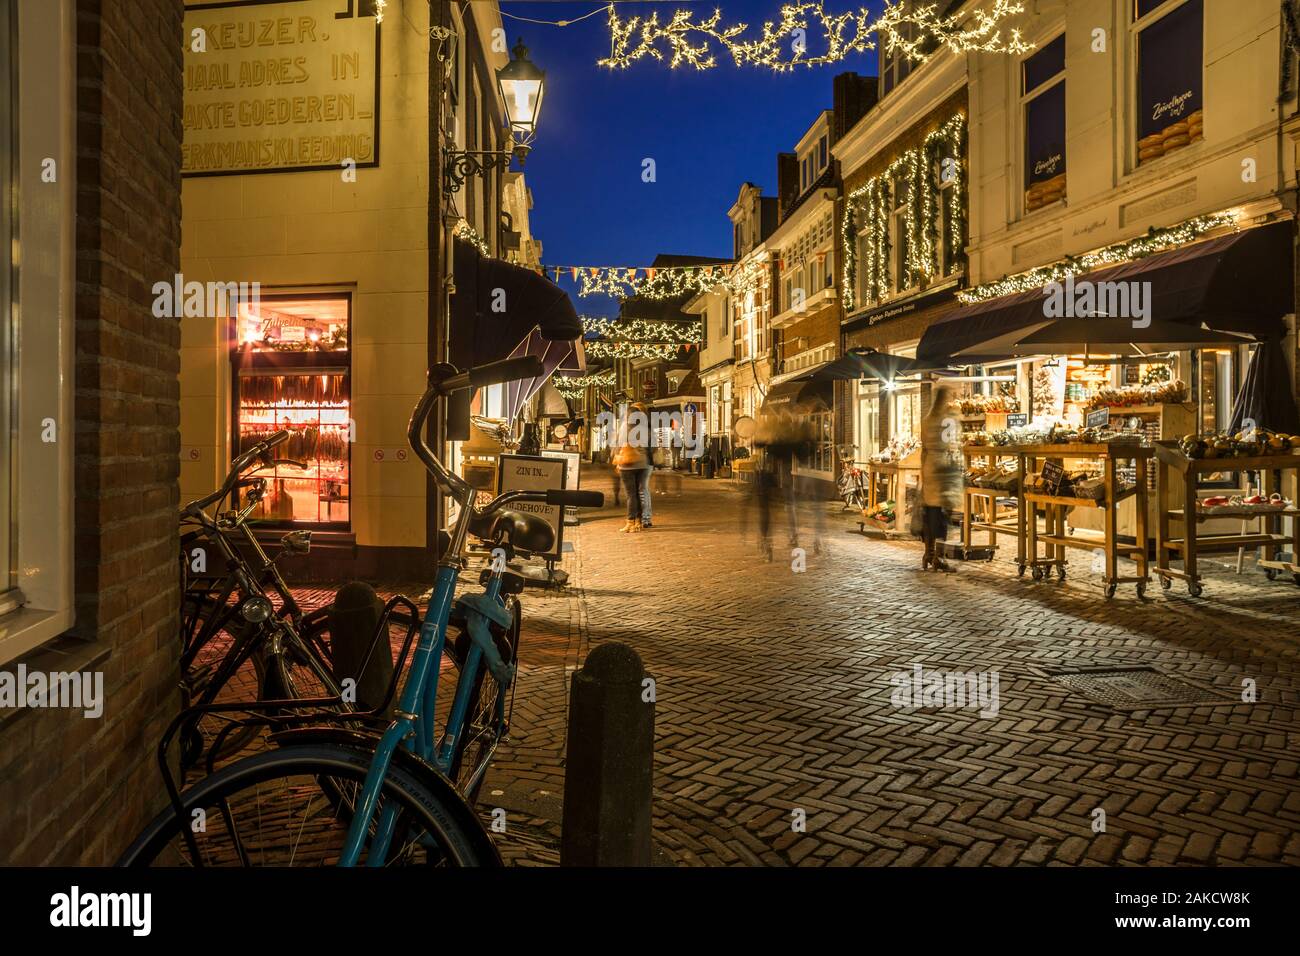 People are shopping in the 'Kleine Kerkstraat' at dusk. The street is illuminated by Christmas lights. The 'Kleine Kerkstraat' in Leeuwarden is repeat Stock Photo